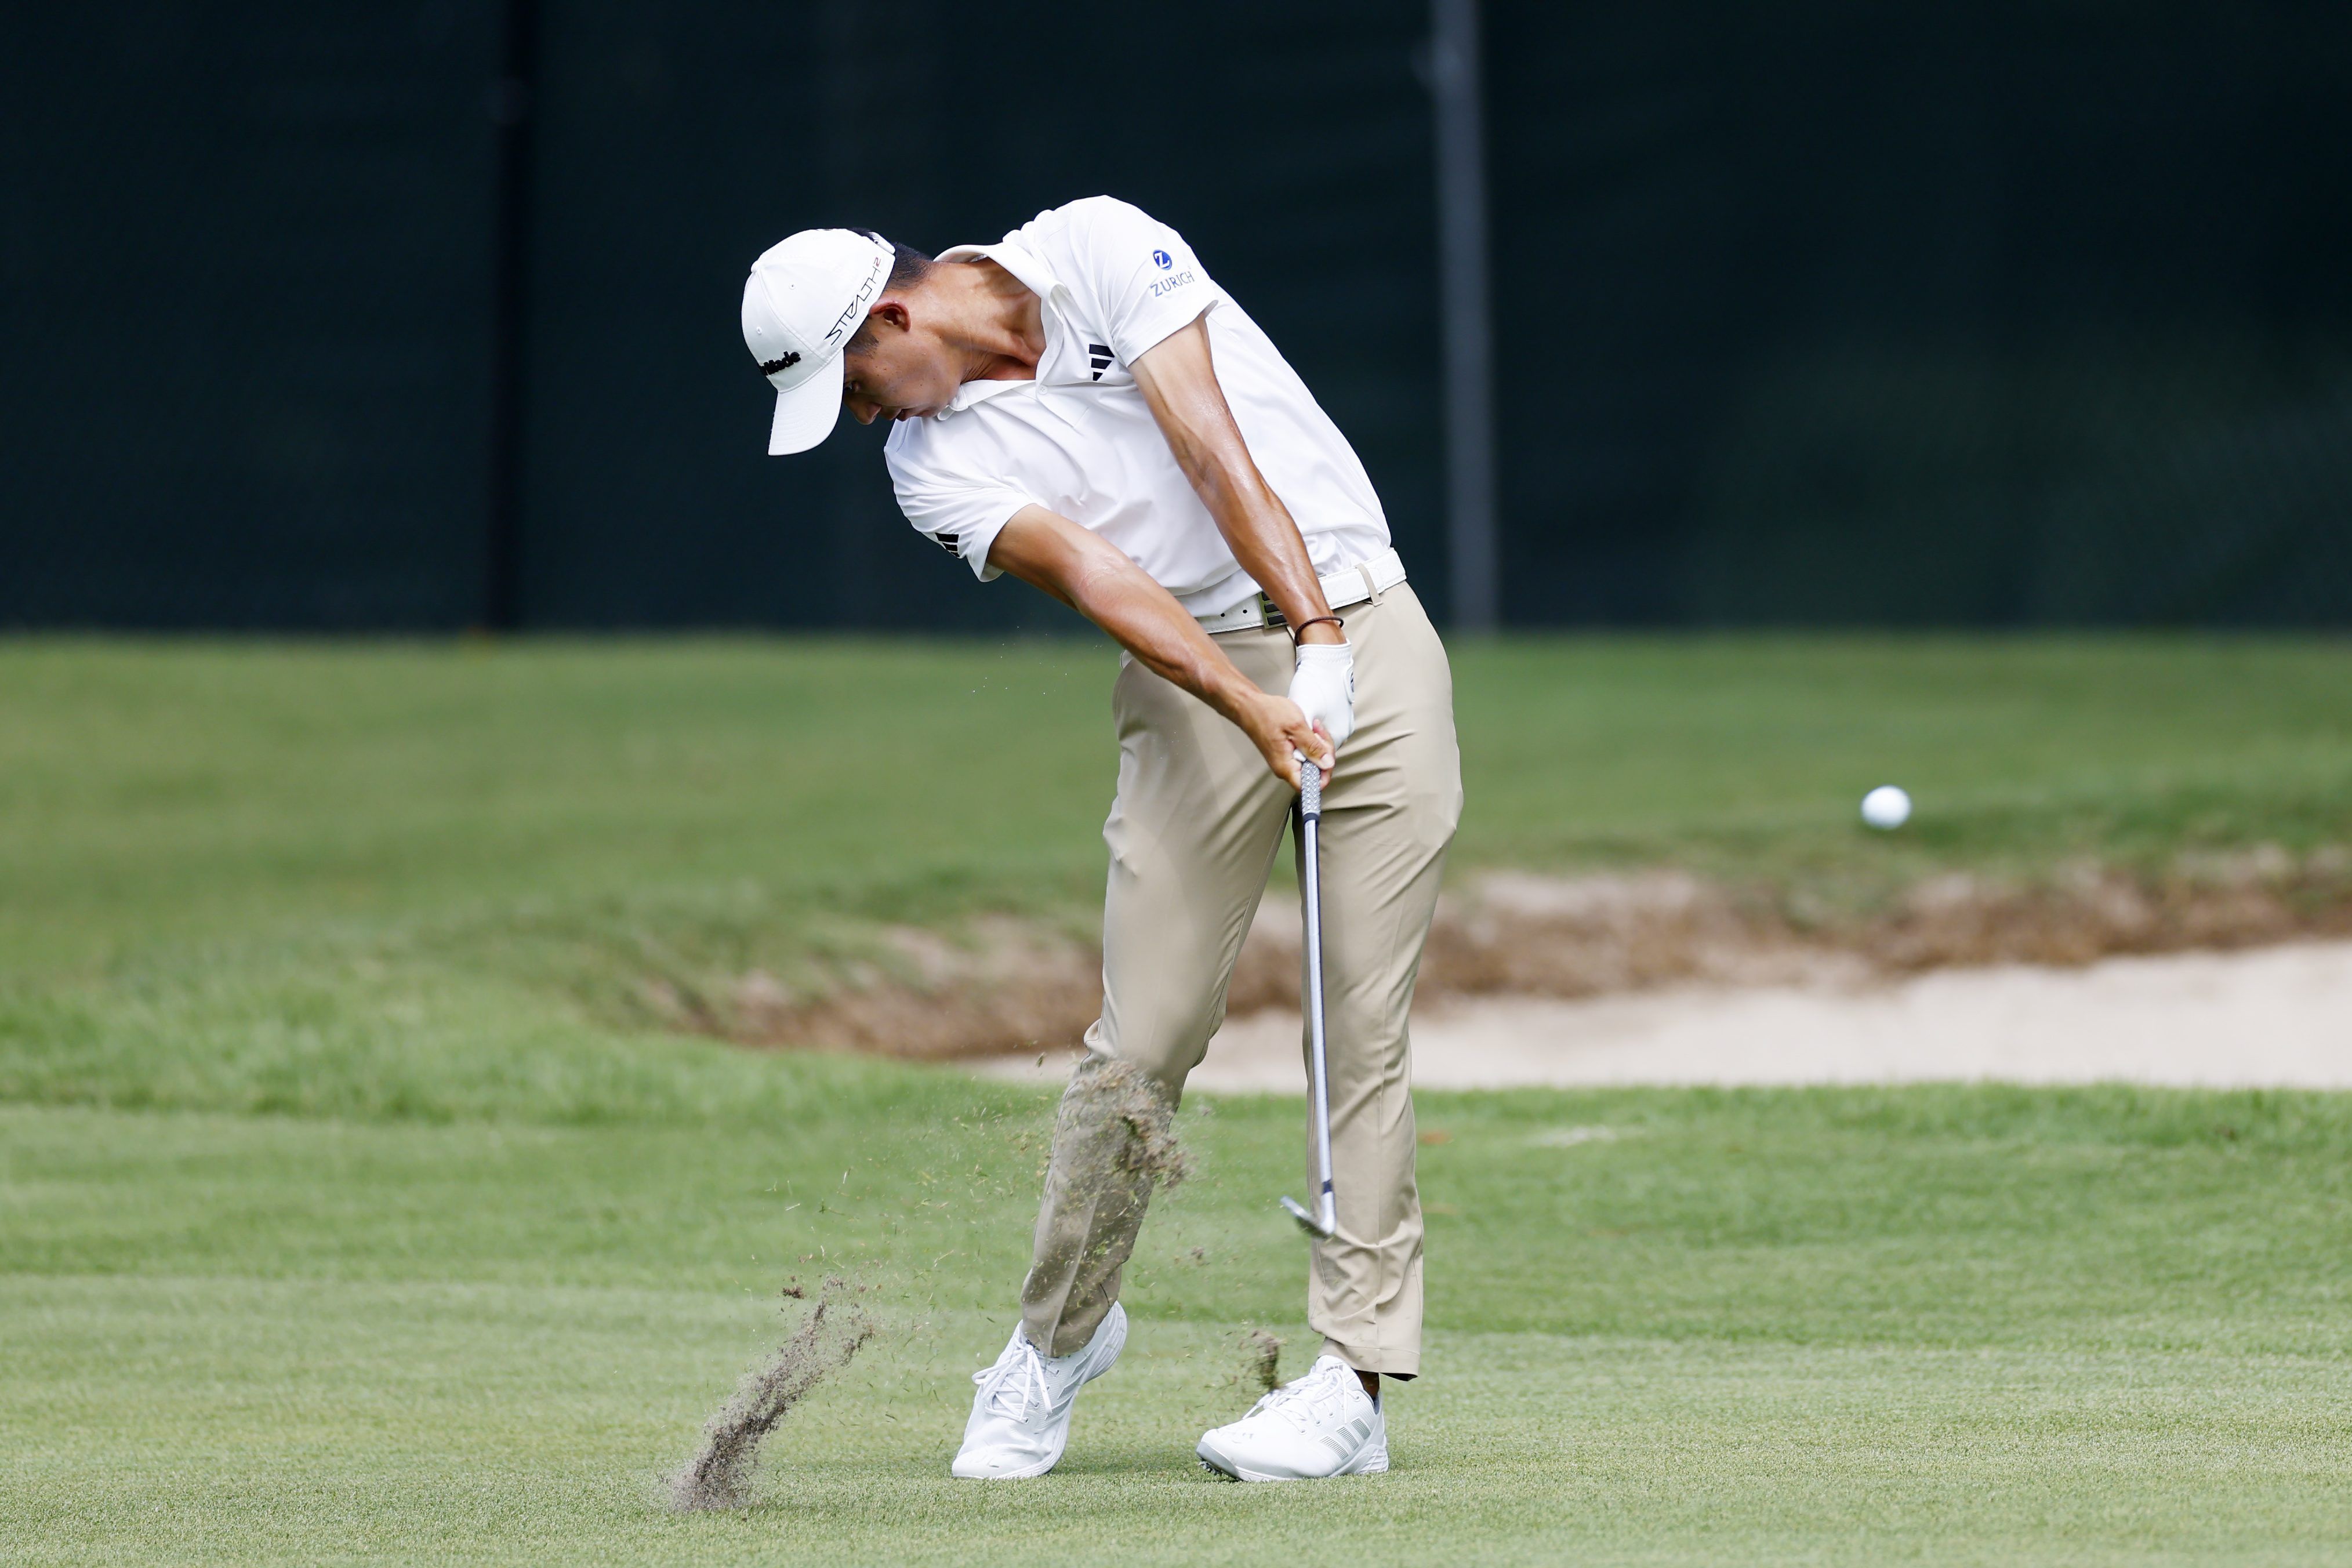 Collin Morikawa hopes sizzling 61 shows hes Ryder Cup ready, even if the gallery didnt seem impressed Golf News and Tour Information GolfDigest